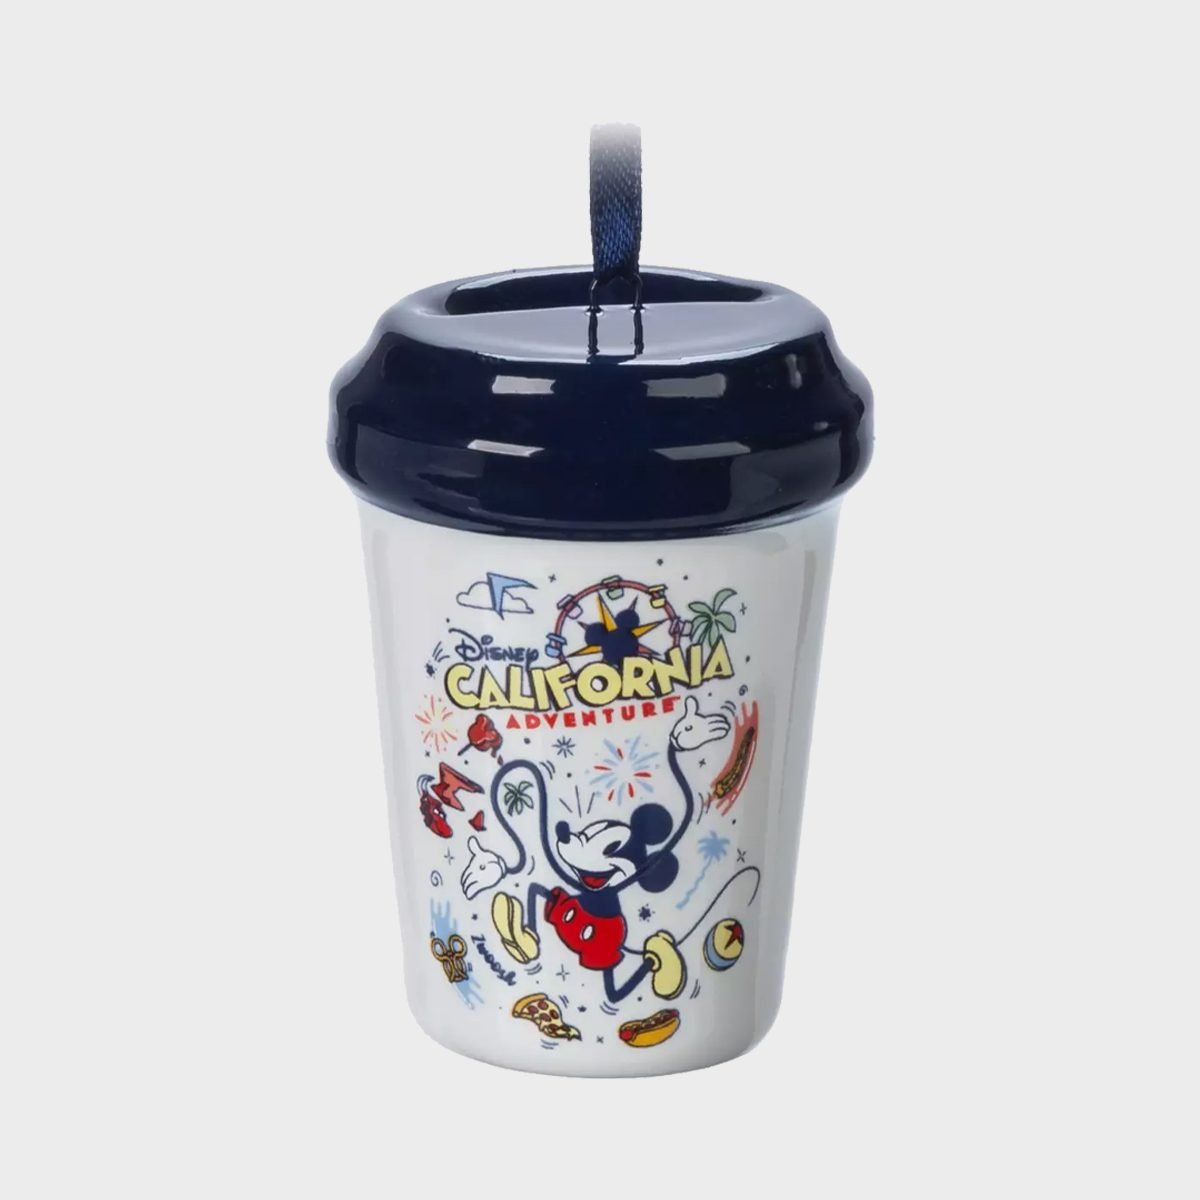 https://www.rd.com/wp-content/uploads/2023/02/Mickey-Mouse-Starbucks-Cup-Ornament-ecomm-shopdisney.com_.jpg?fit=700%2C700